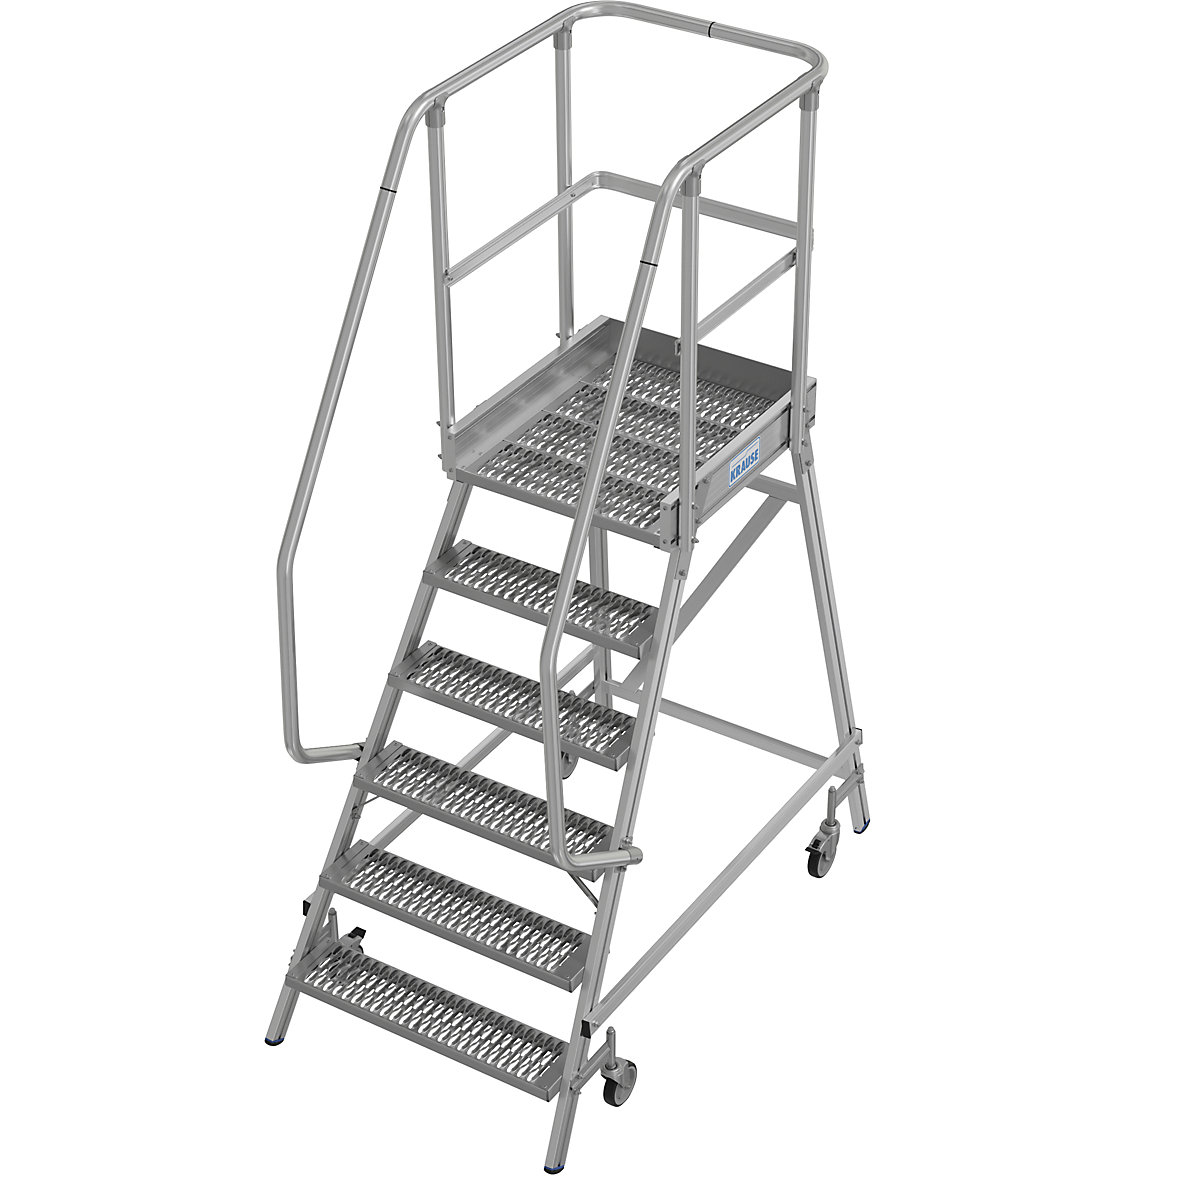 Mobile safety steps with R13 anti-slip properties – KRAUSE, with single sided access, 6 steps incl. platform-3